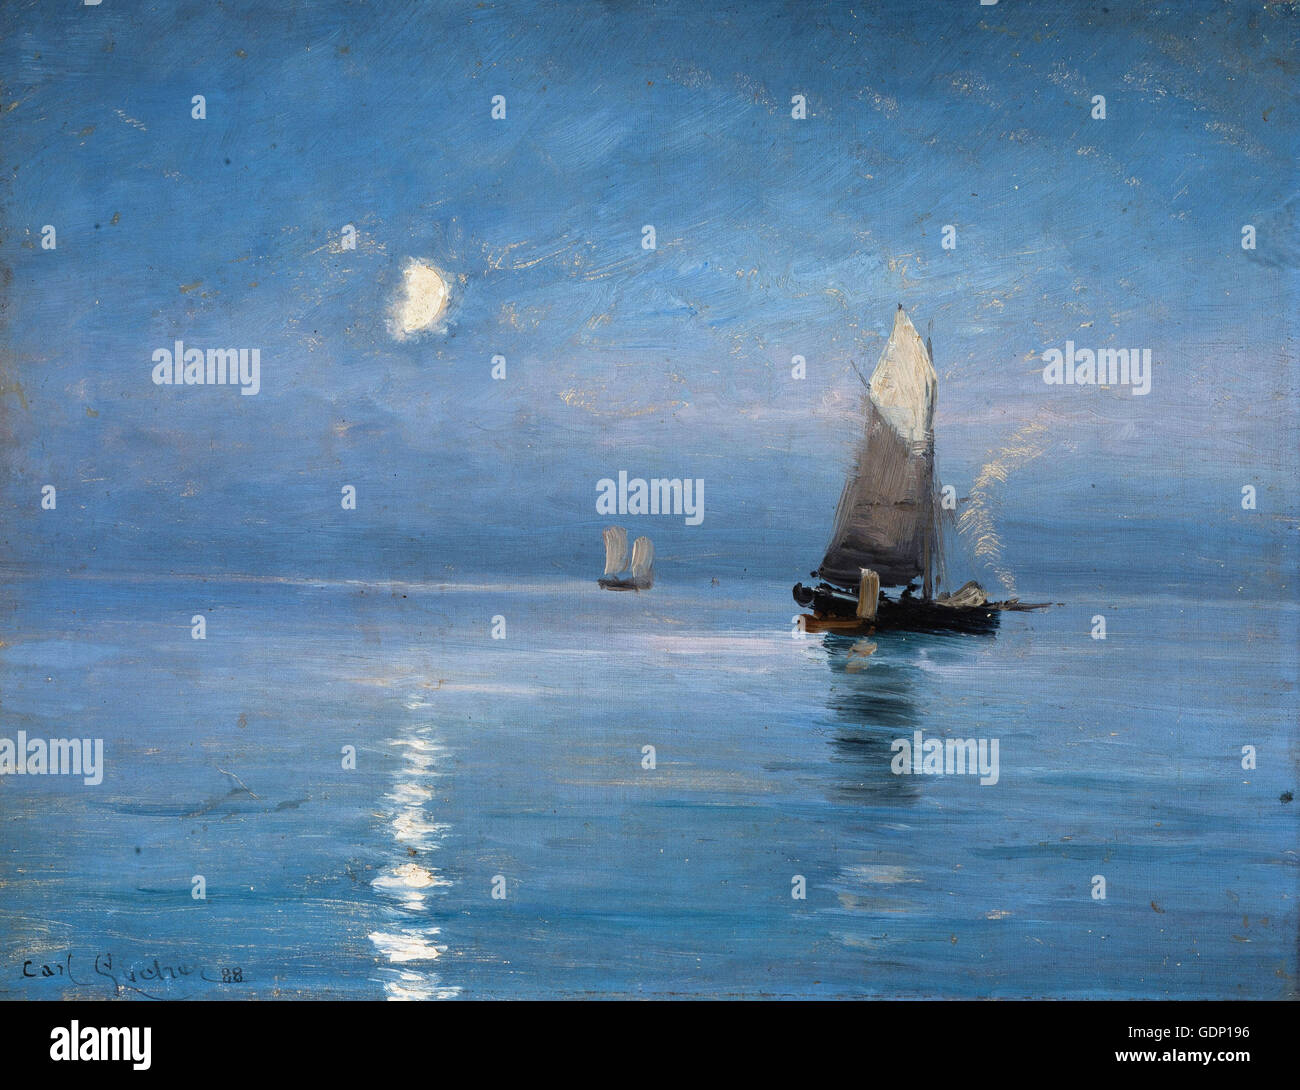 Carl Locher - Fishing cutters in the moonlit night Stock Photo